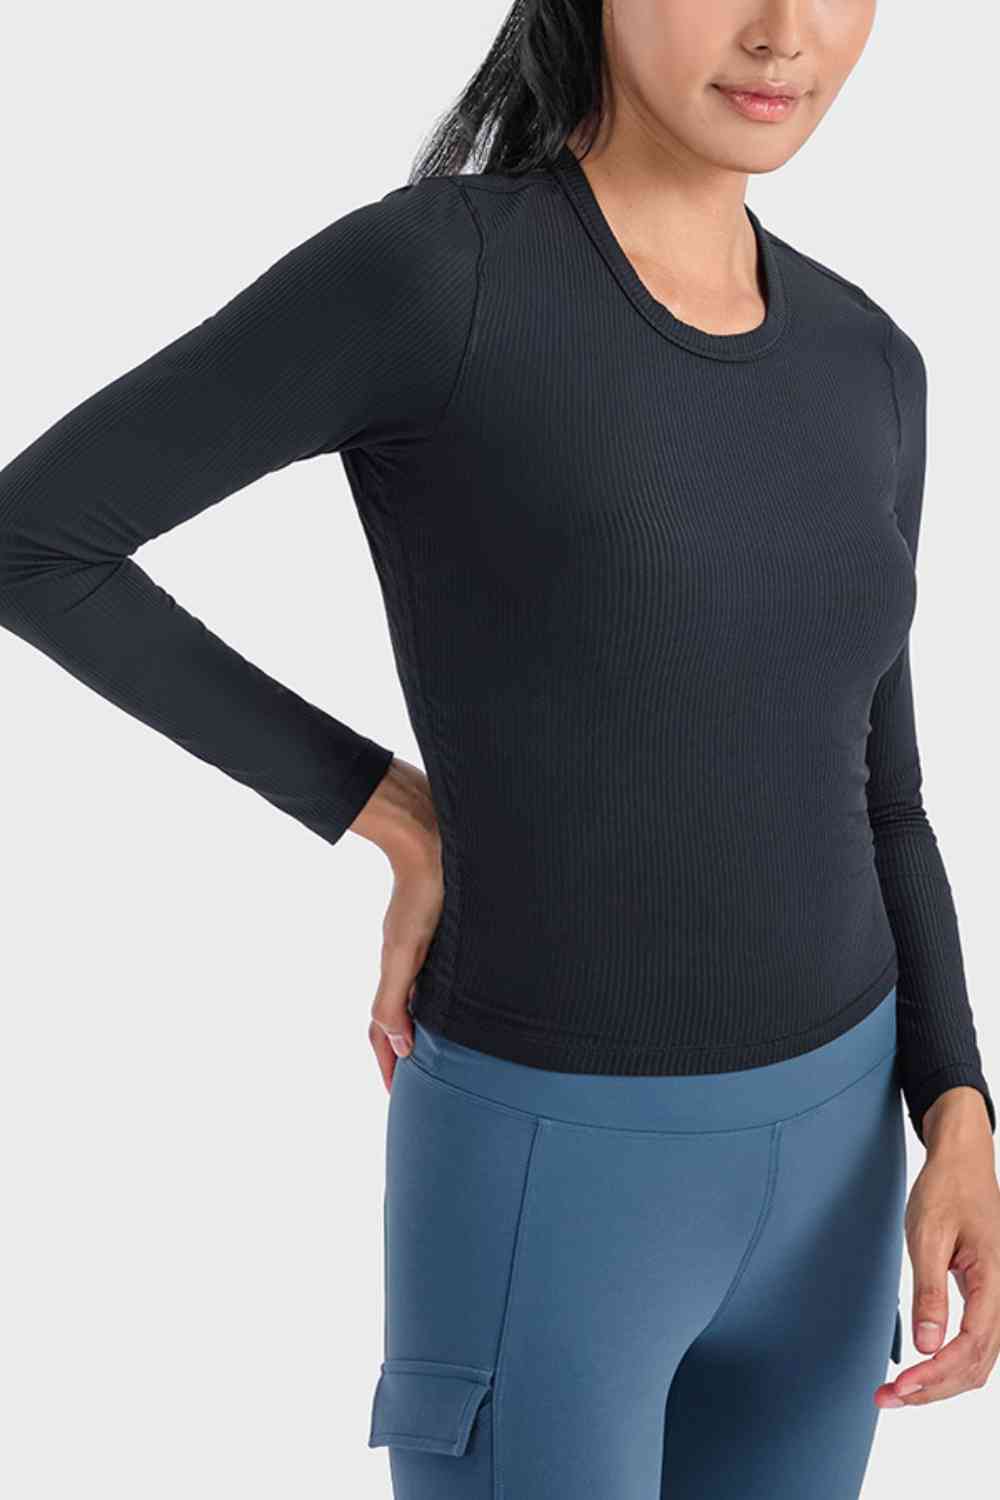 Round Neck Long Sleeve Sports Top Black